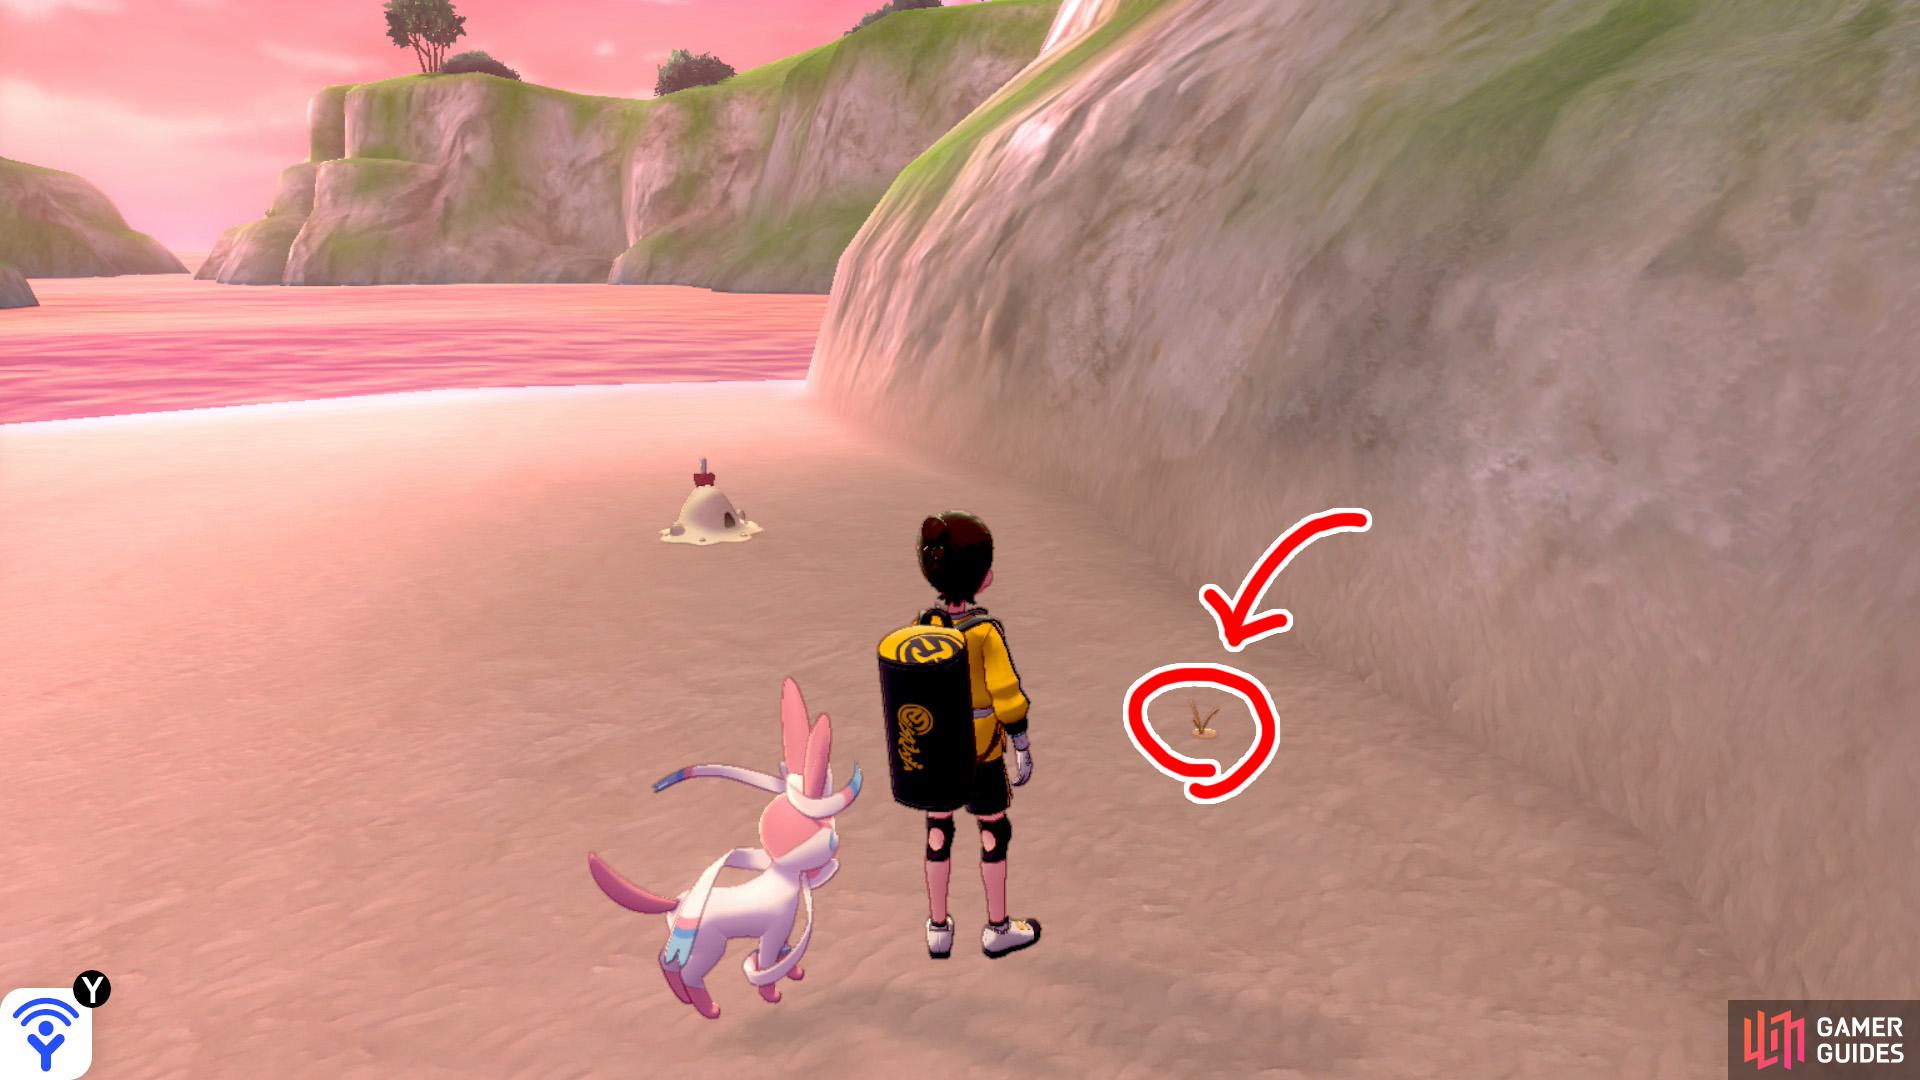 5/7: From Diglett 4, turn around until you face the cliff wall. You'll find it near the cliff wall.